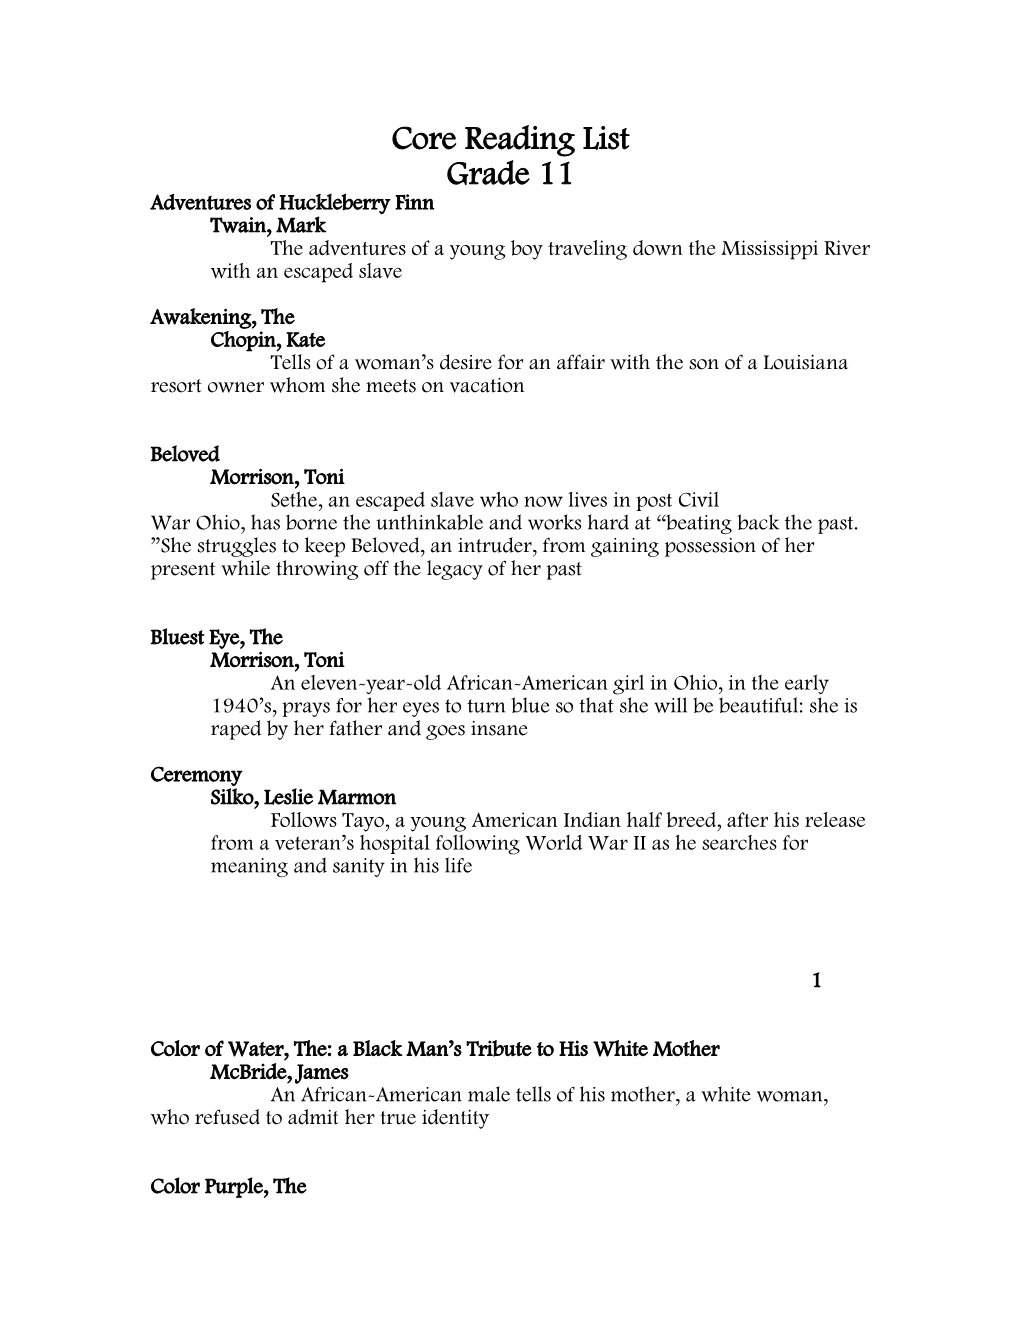 Core Reading List Grade 11 Adventures of Huckleberry Finn Twain, Mark the Adventures of a Young Boy Traveling Down the Mississippi River with an Escaped Slave